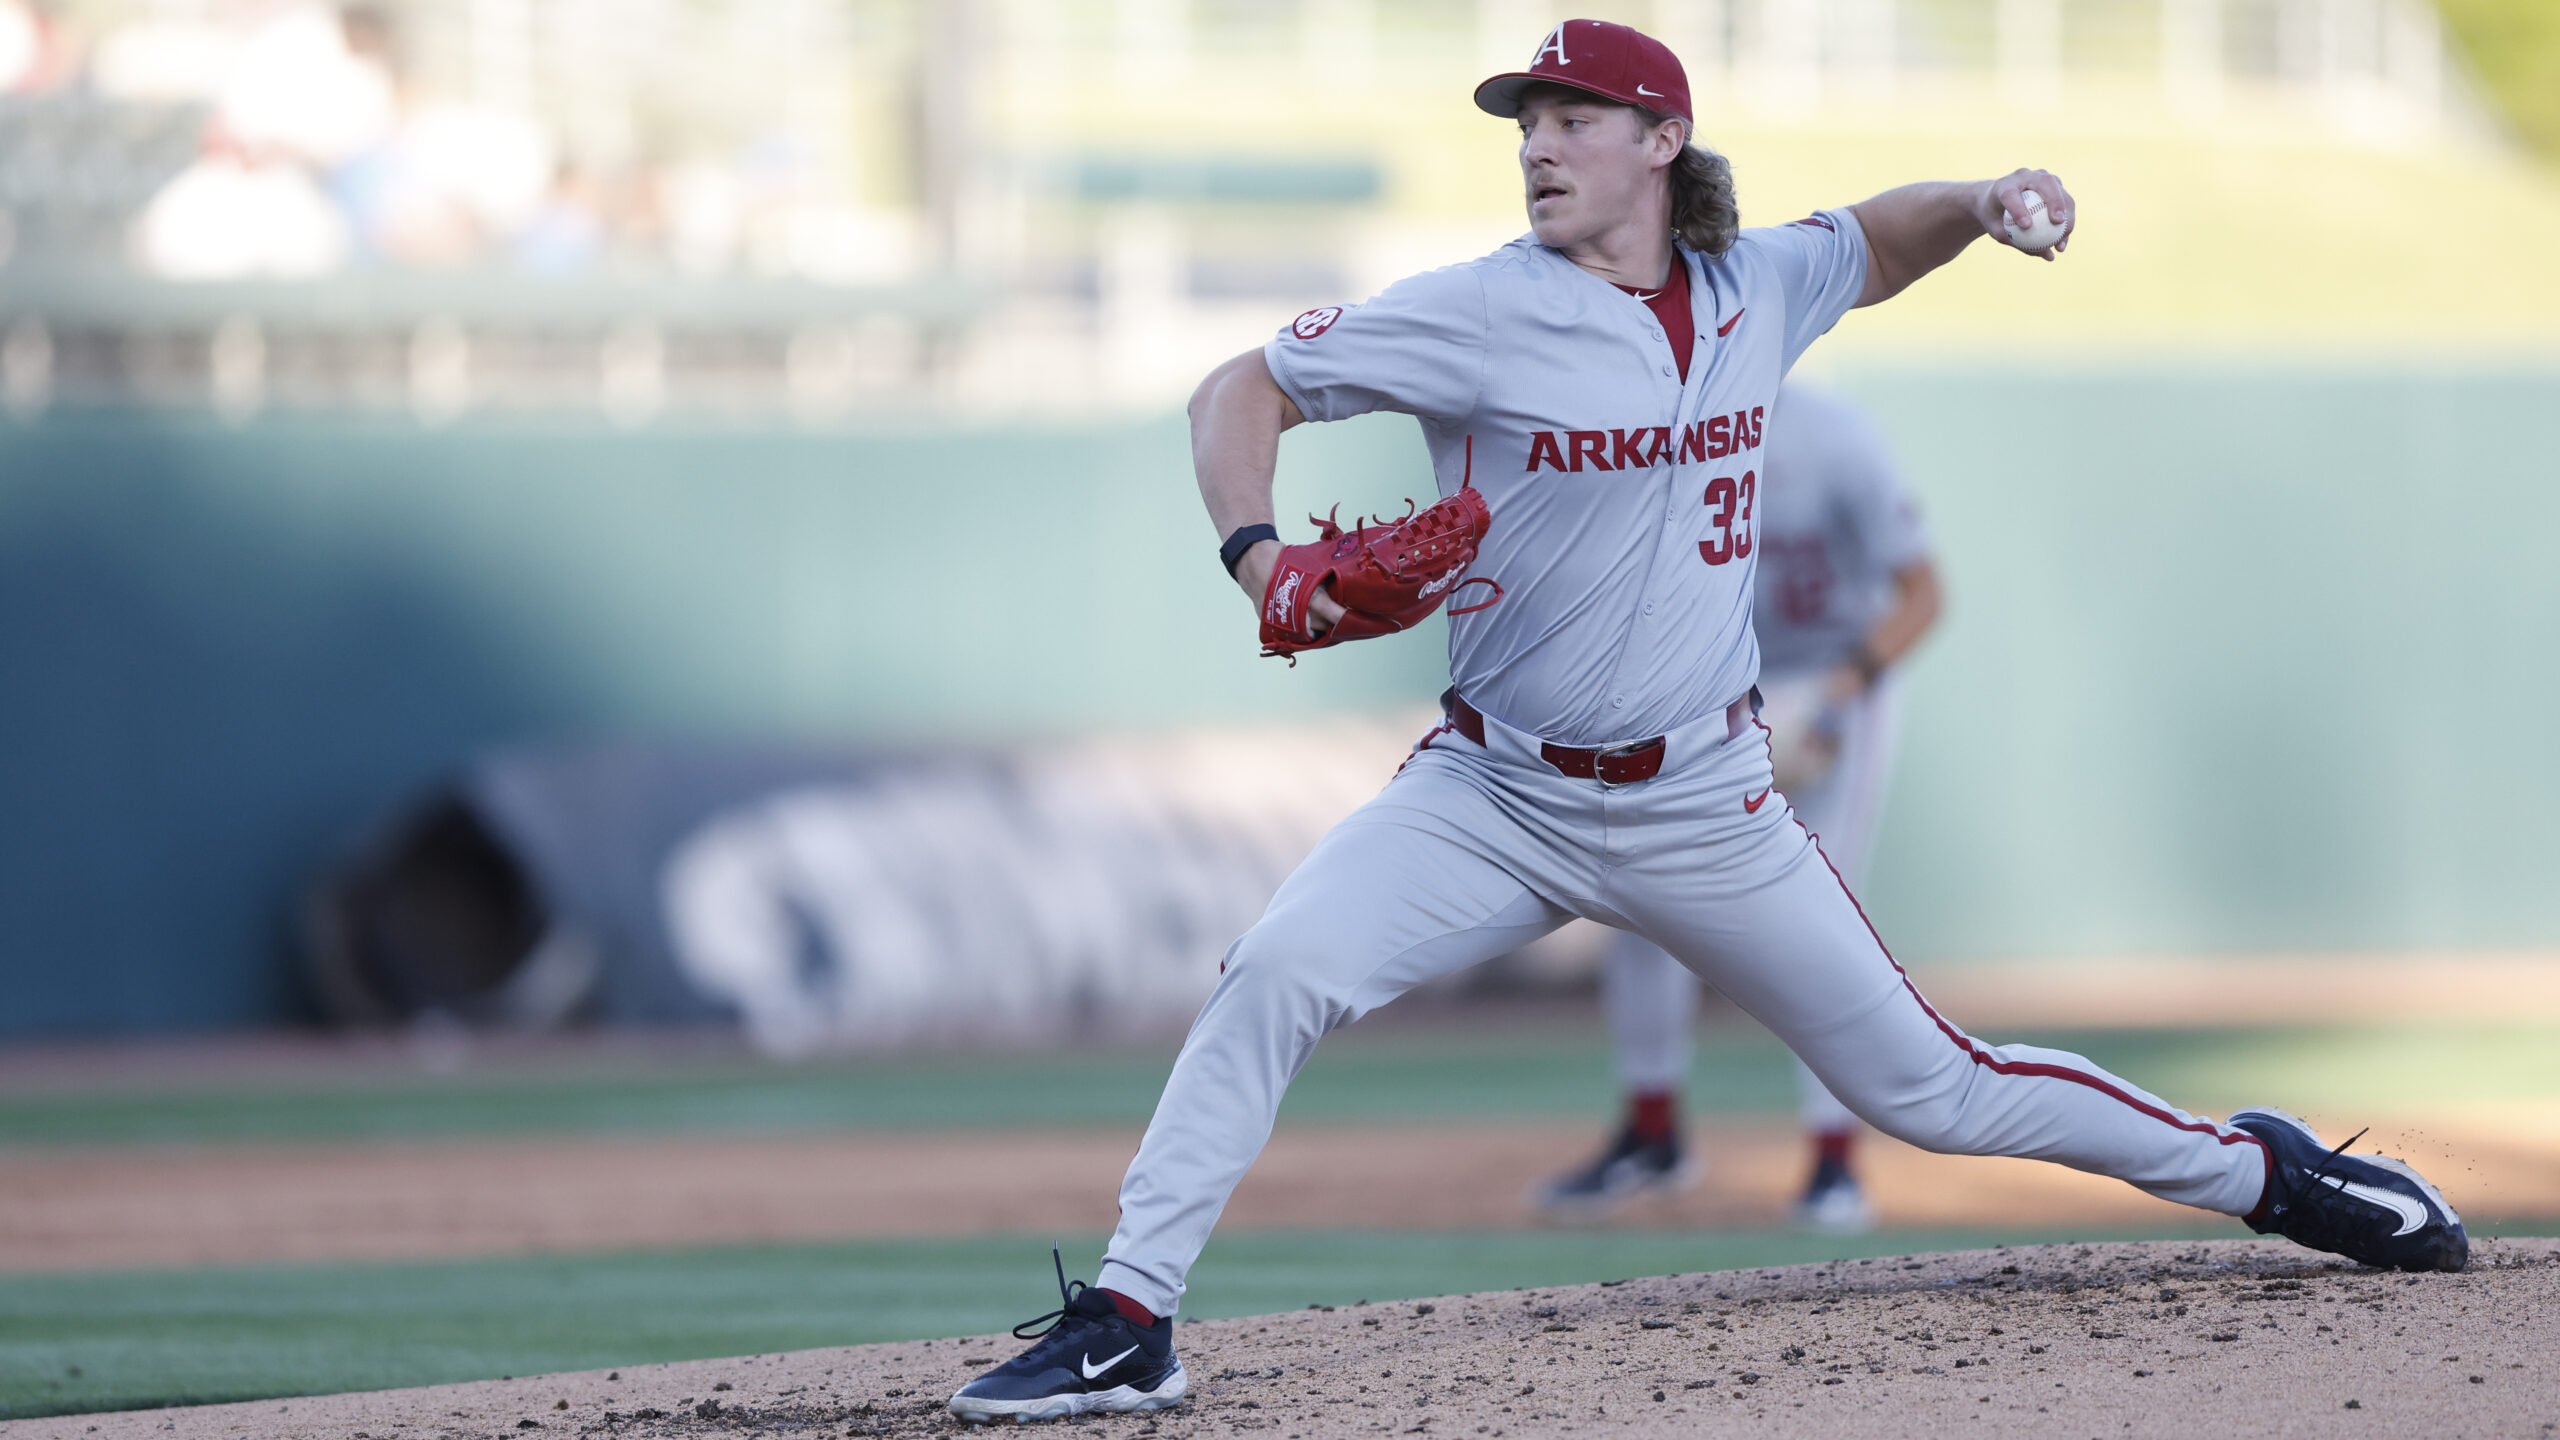 No. 3 Arkansas shut out by No. 5 Texas A&M in 11 innings as Hagen Smith makes history